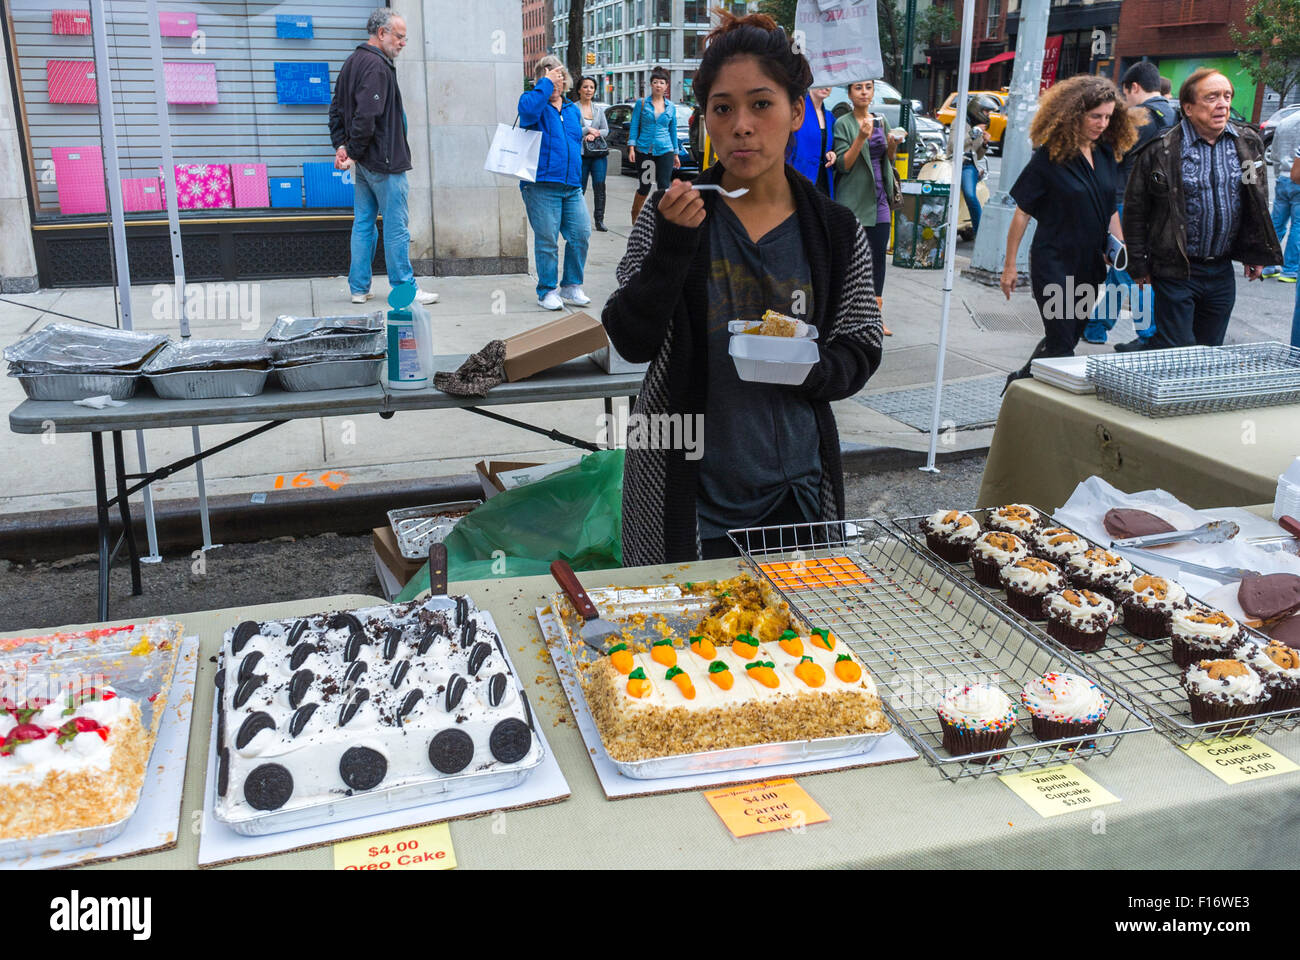 New York City, USA, Clerk city woman, Eating Cake at Food Stall, Street Food Vendor, Pastries, at outdoor Chelsea Flea Market, Summer Stock Photo